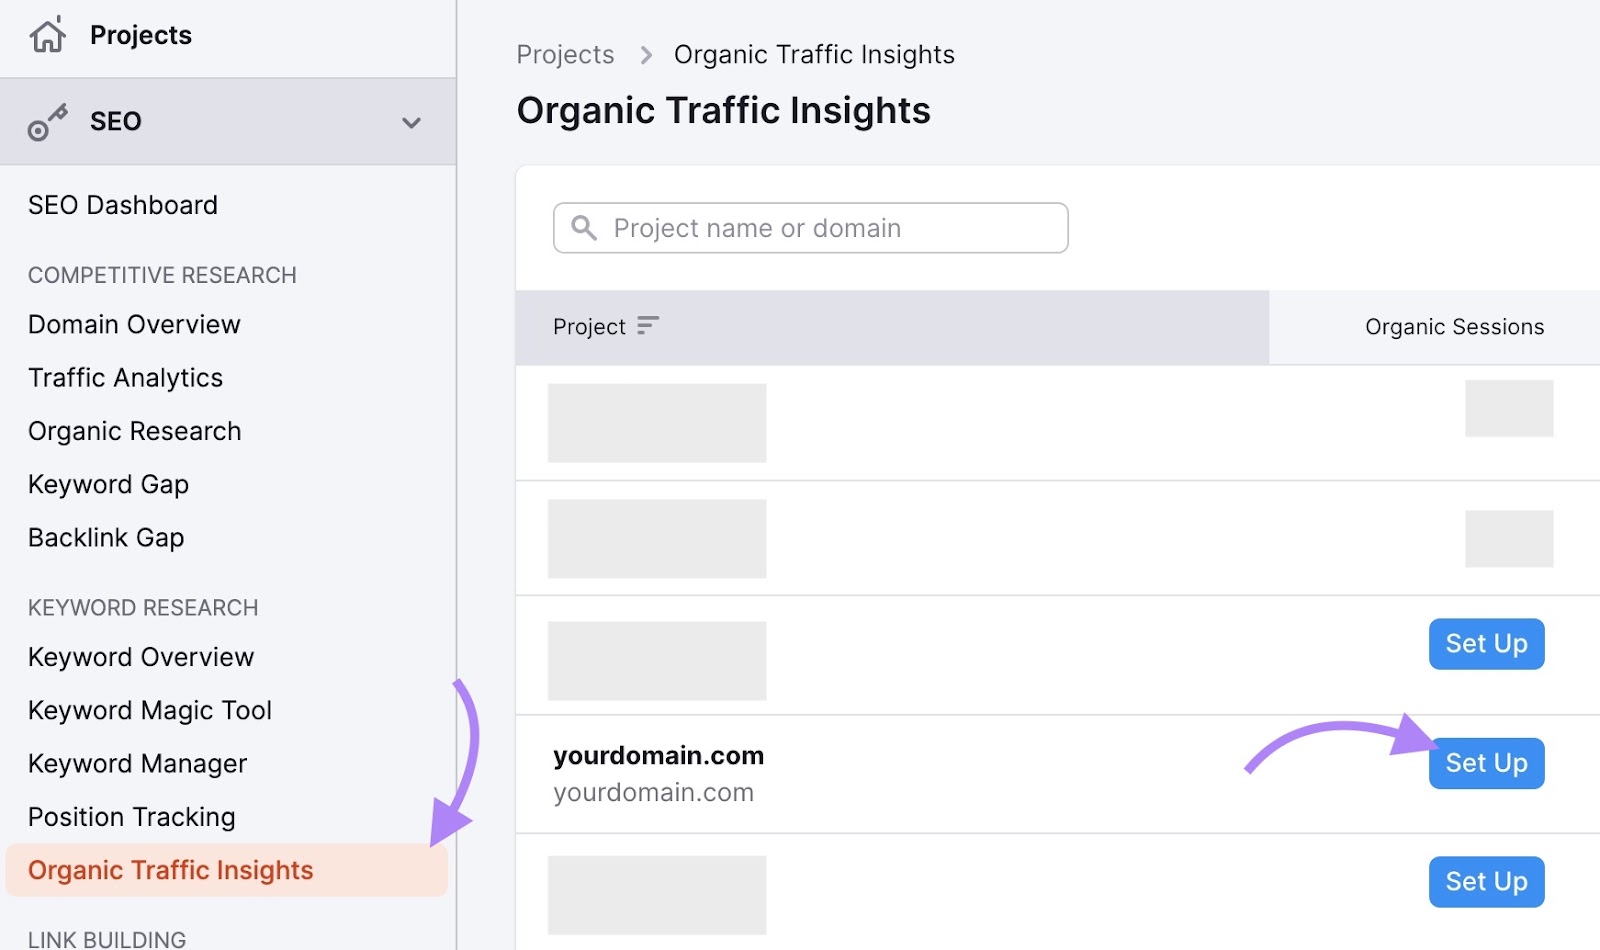 Organic traffic insights highlighted in the left menu bar with 'Set up' next to a specific domain clicked.